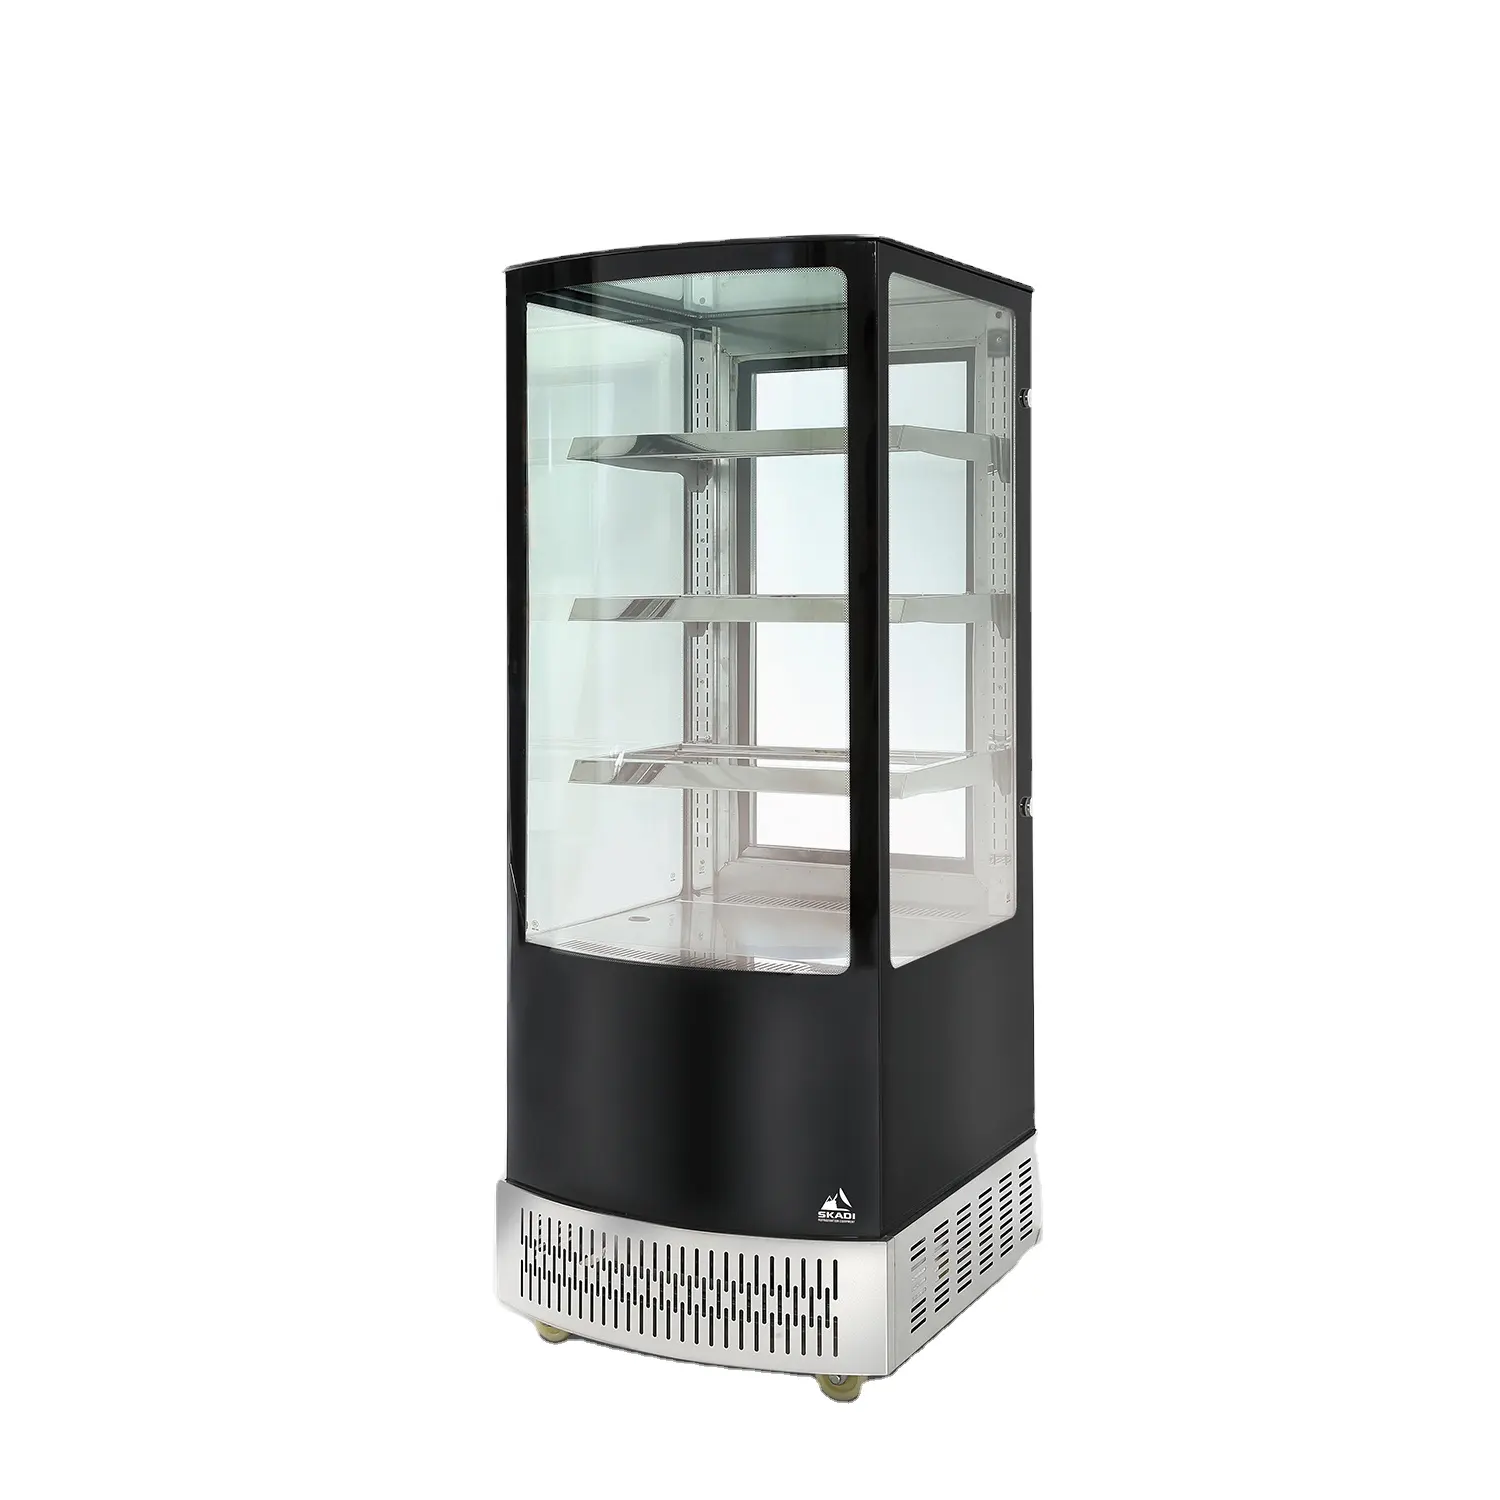 Refrigerated vertical display showcase for pastry Vertical cake display fridge case deli cabinet showcase chiller